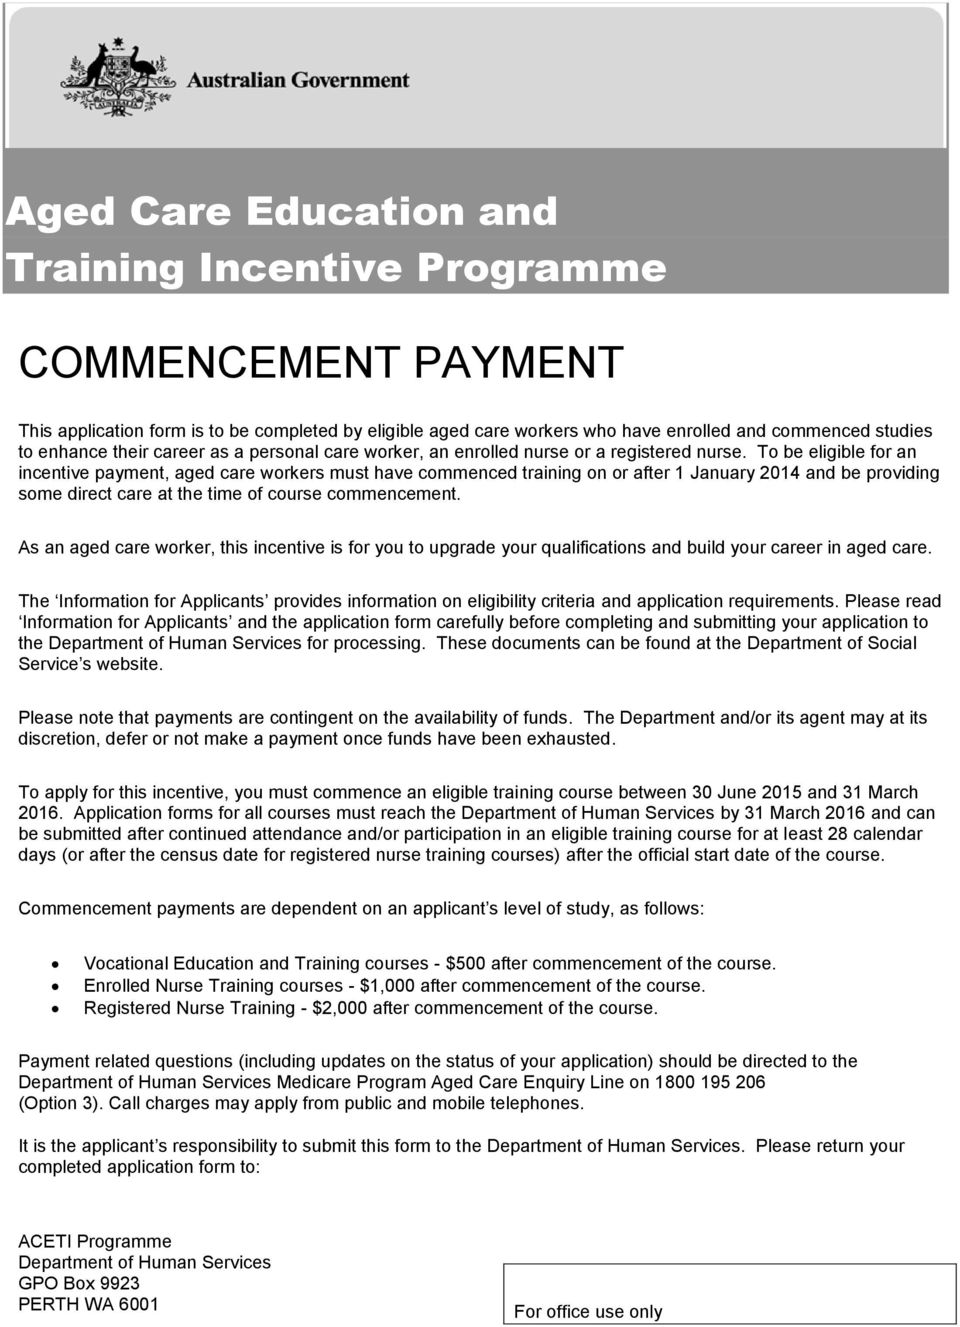 To be eligible for an incentive payment, aged care workers must have commenced training on or after 1 January 2014 and be providing some direct care at the time of course commencement.